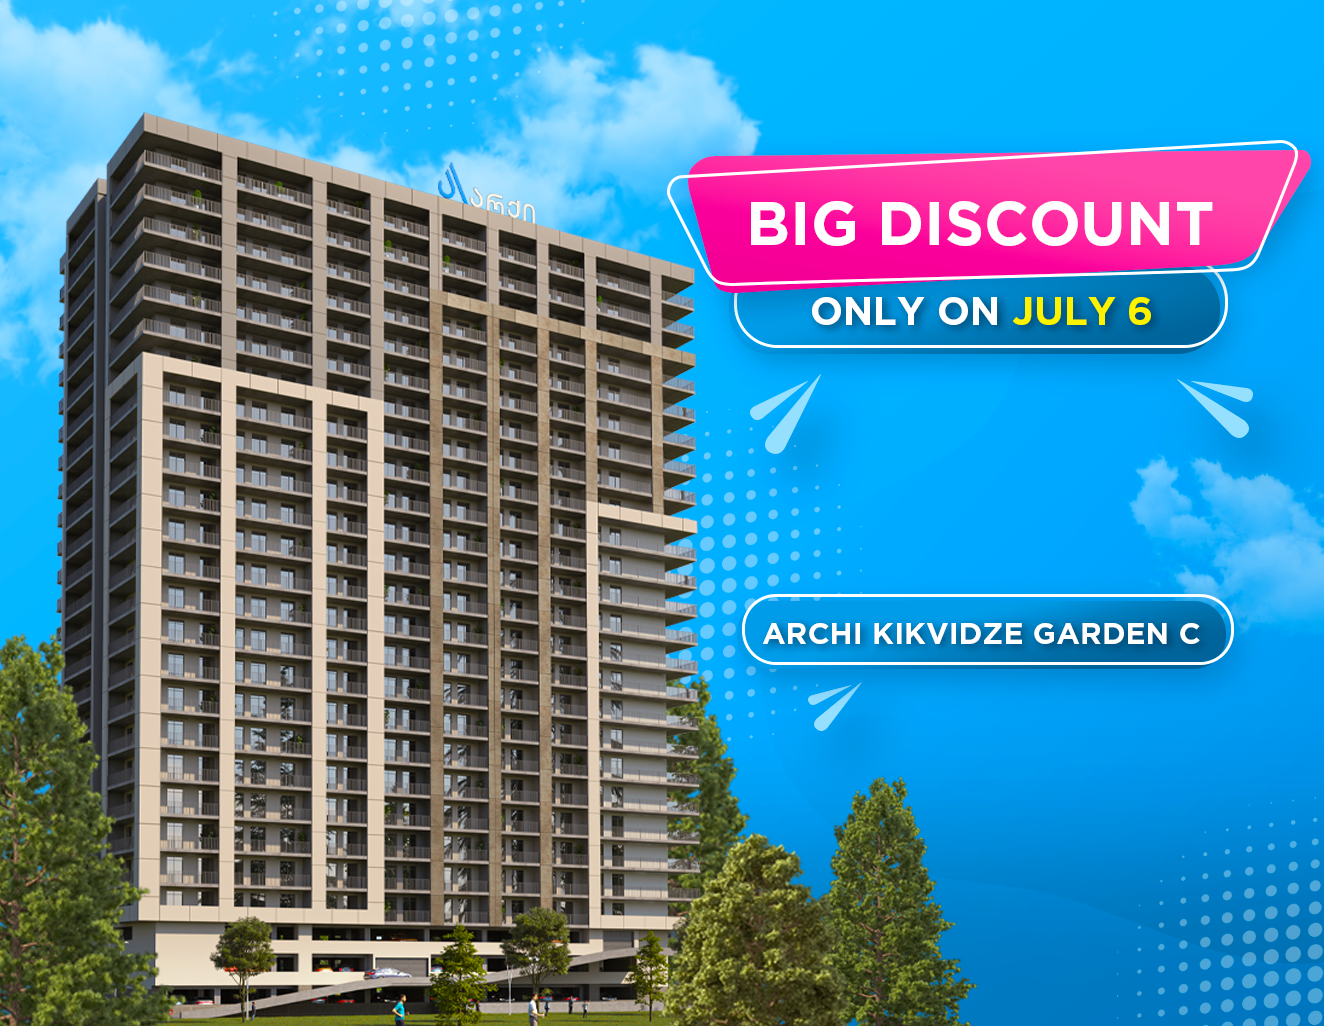 July 6 is a big discount day at Archi